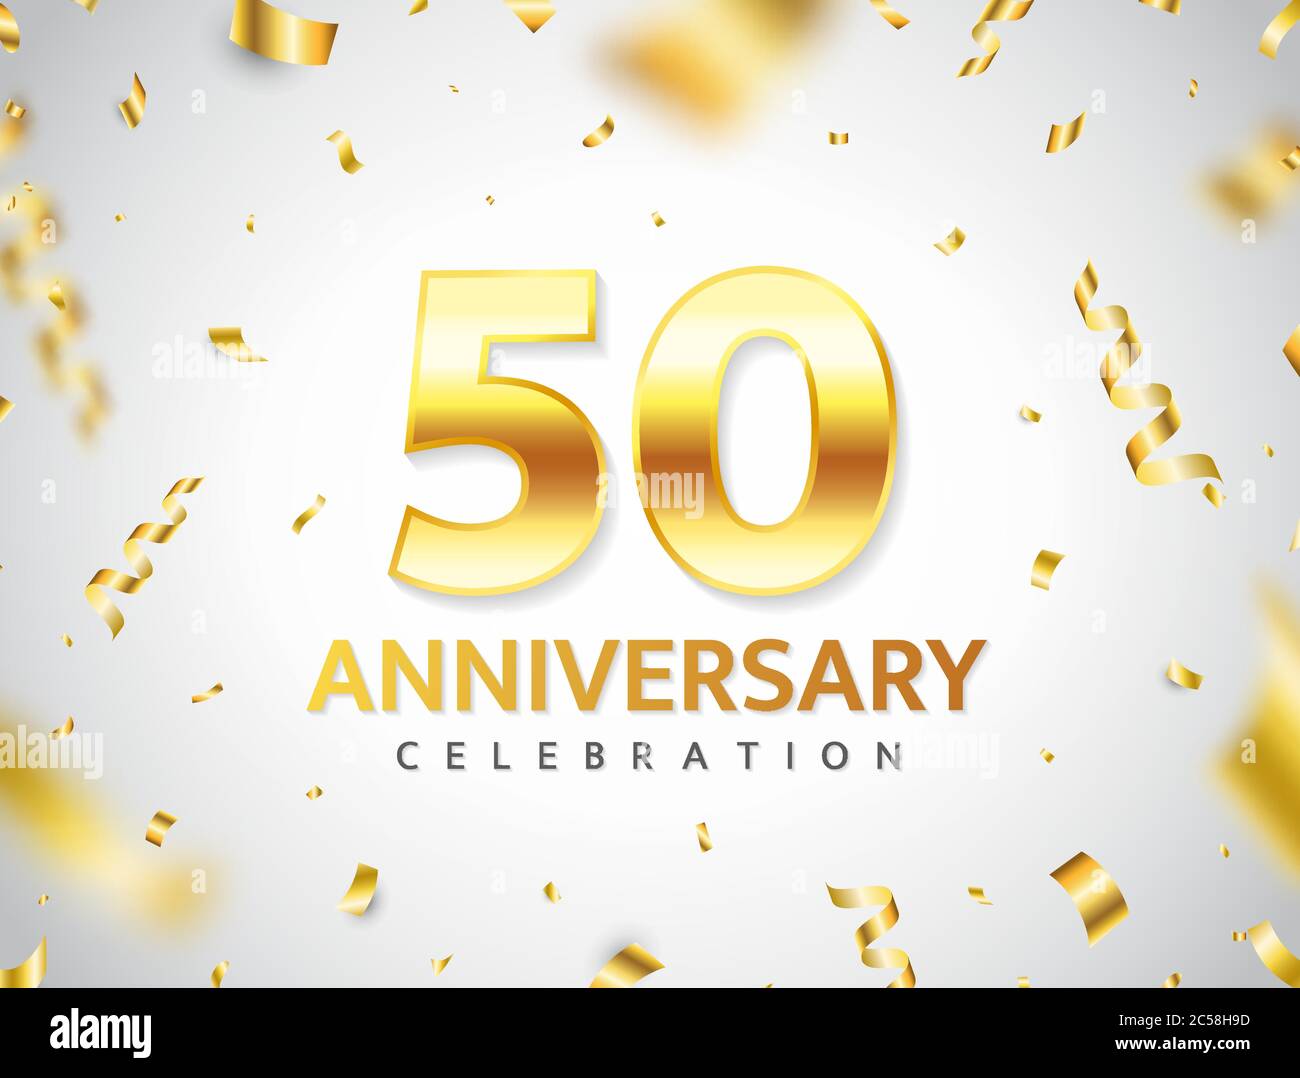 50th anniversary backgrounds